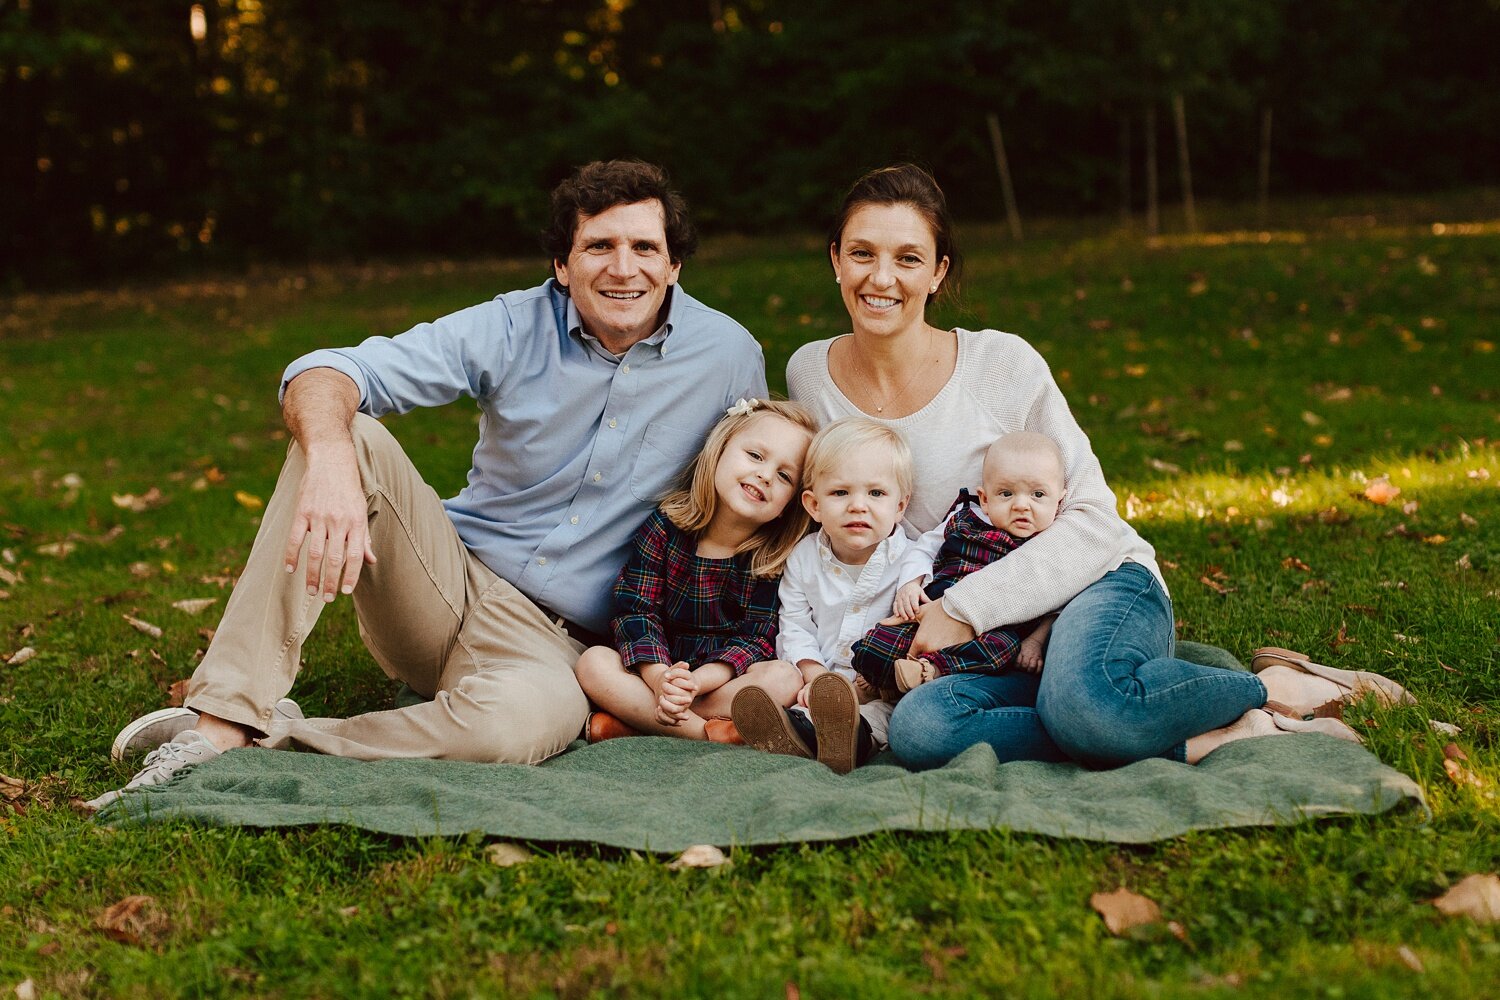 Princeton, New Jersey Family Photo session in the Fall